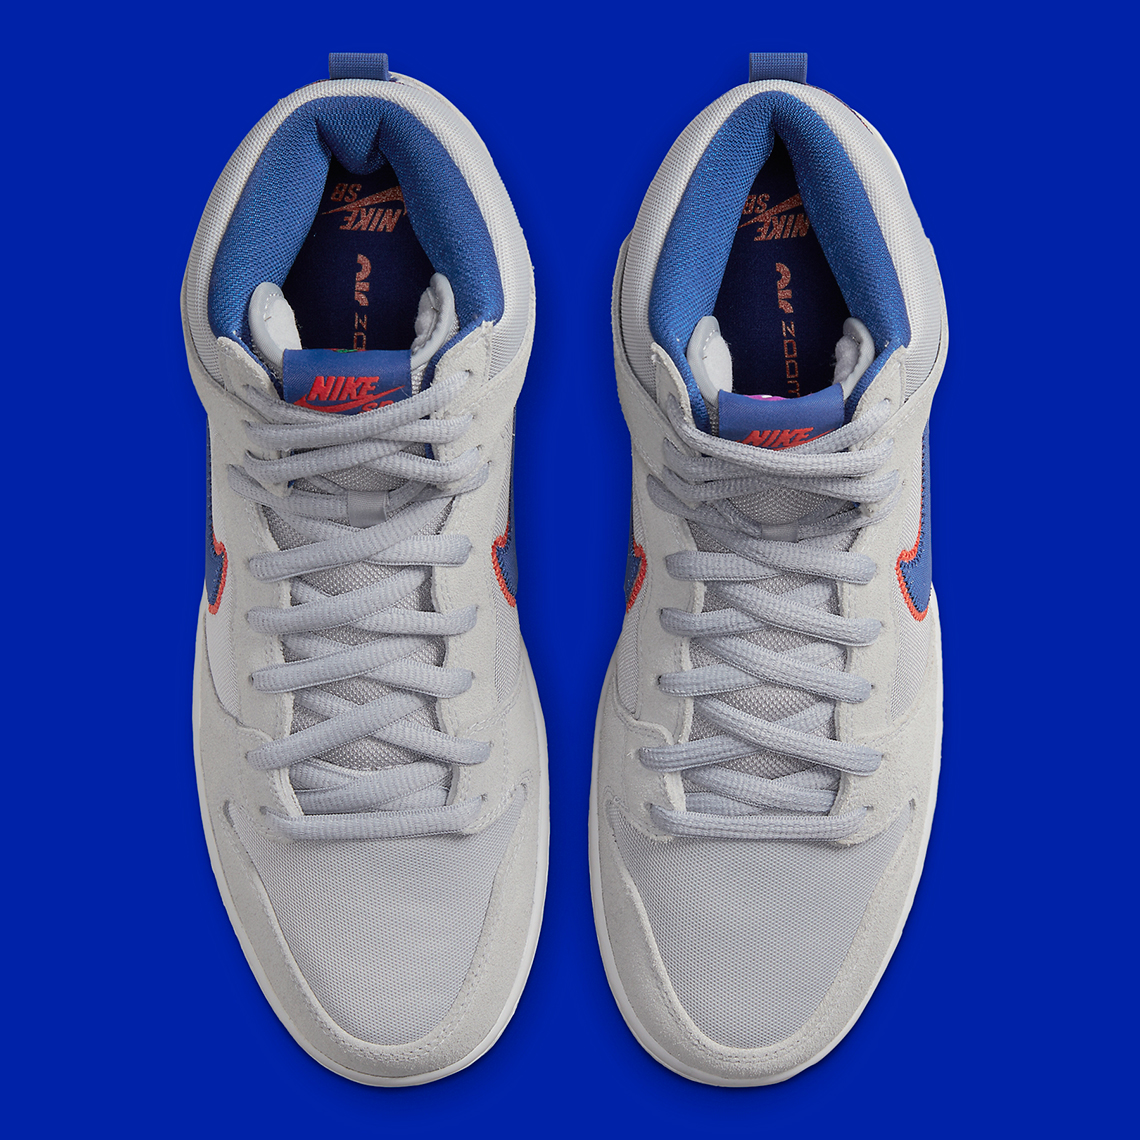 Nike SB Dunk High New York Mets DH7155-001 Release Date